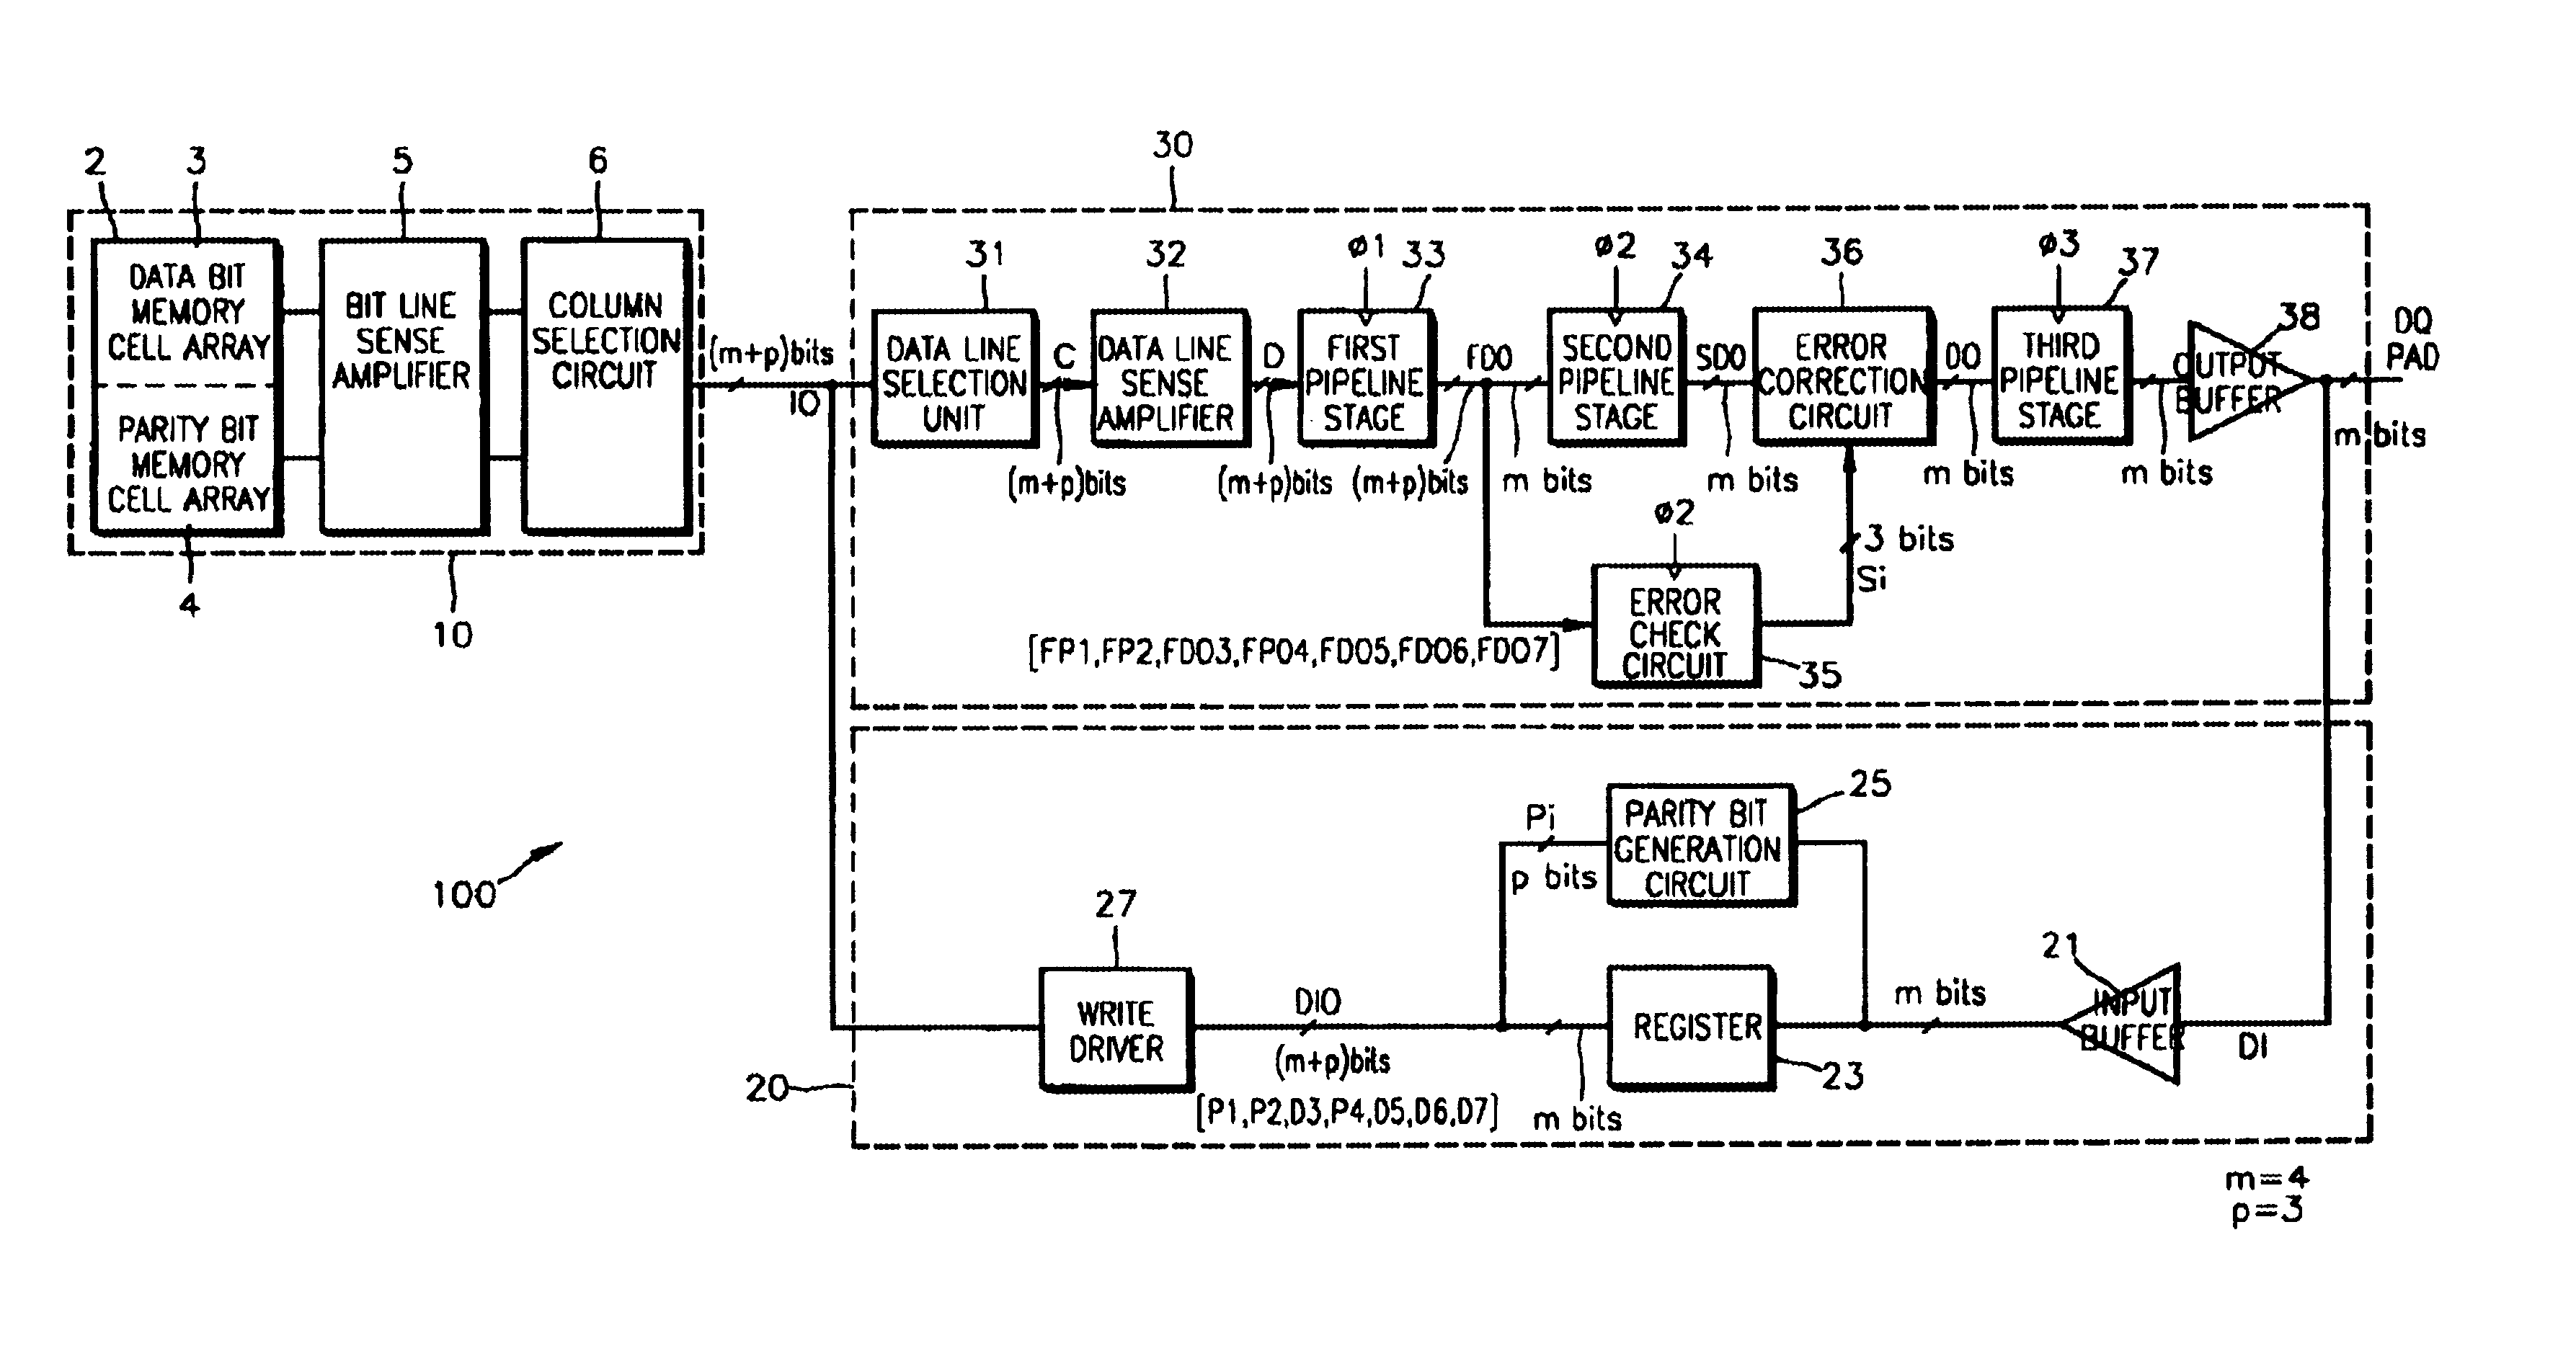 Integrated circuit memory devices having error checking and correction circuits therein and methods of operating same